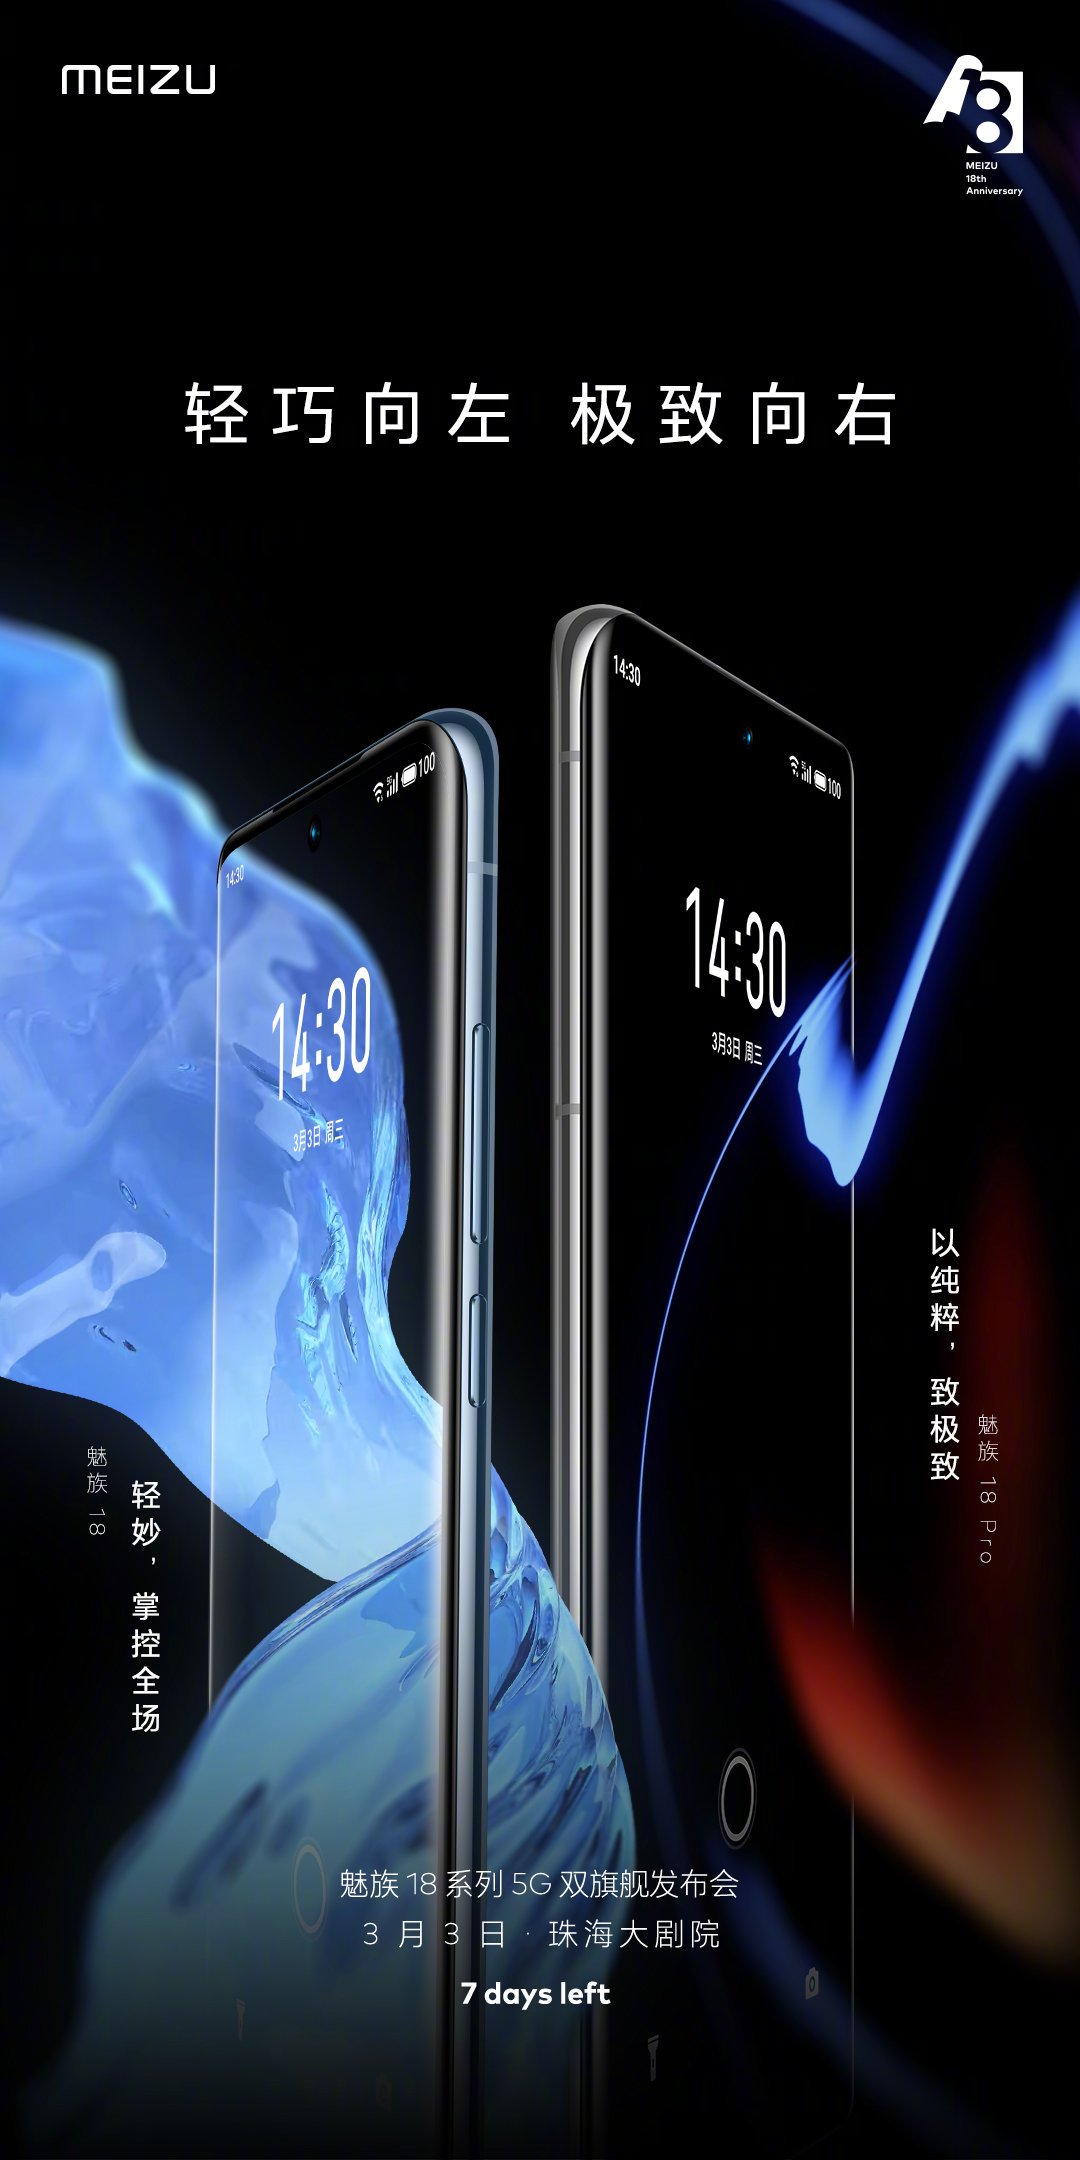 Meizu 18 series flagship smartphones’ render confirms curved screen with punch-hole cutout